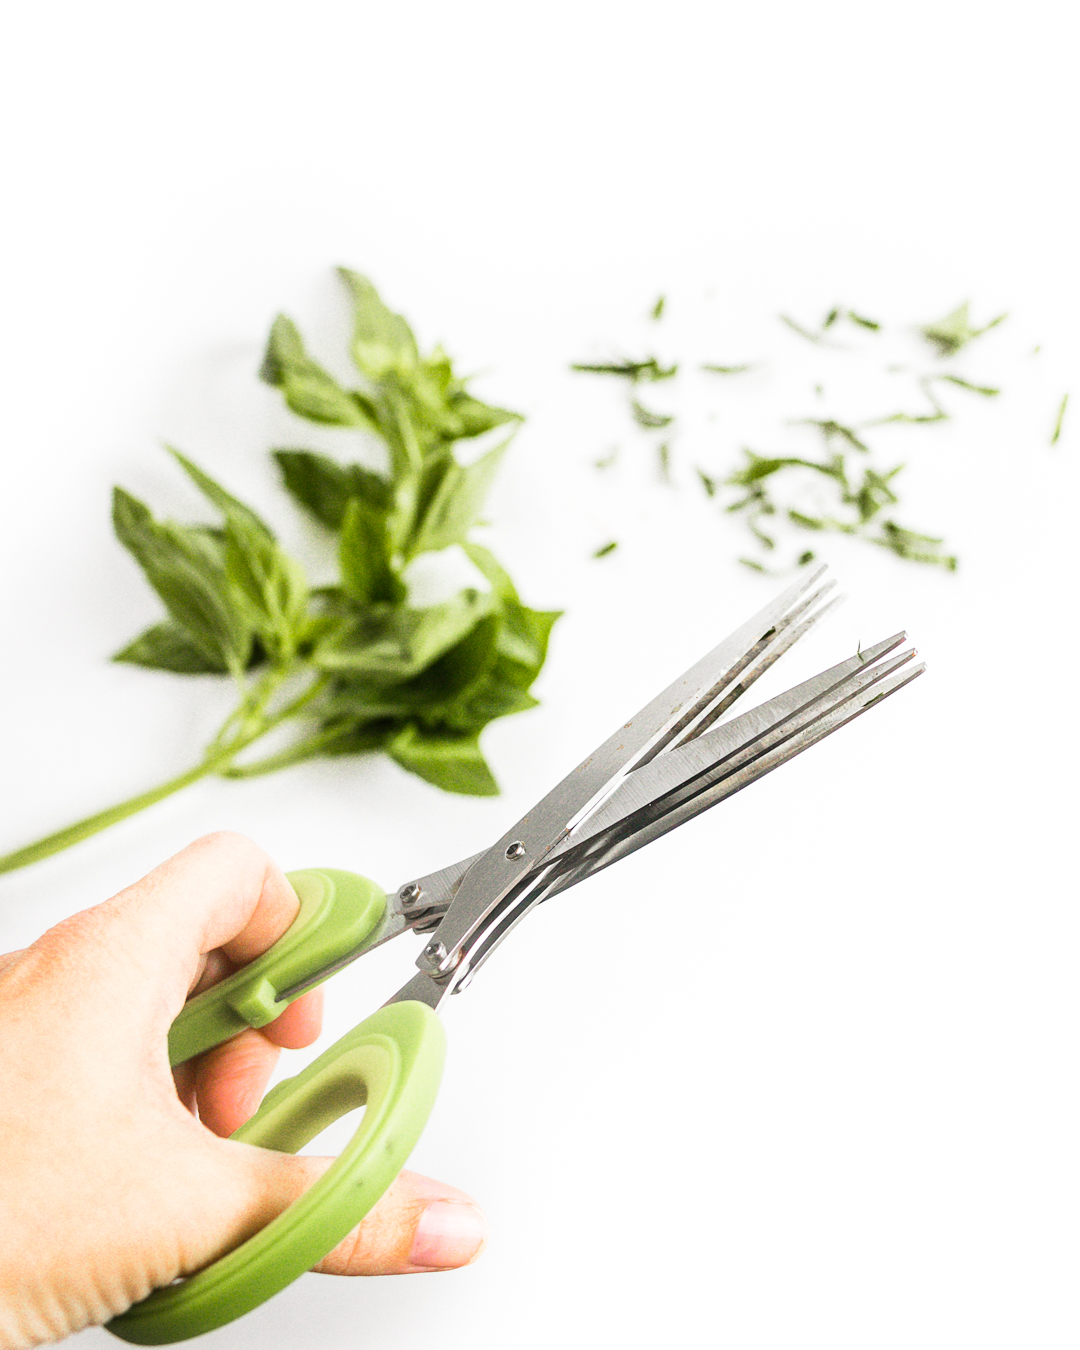 Herb Scissors for cutting, chopping and mincing herbs and vegetables.